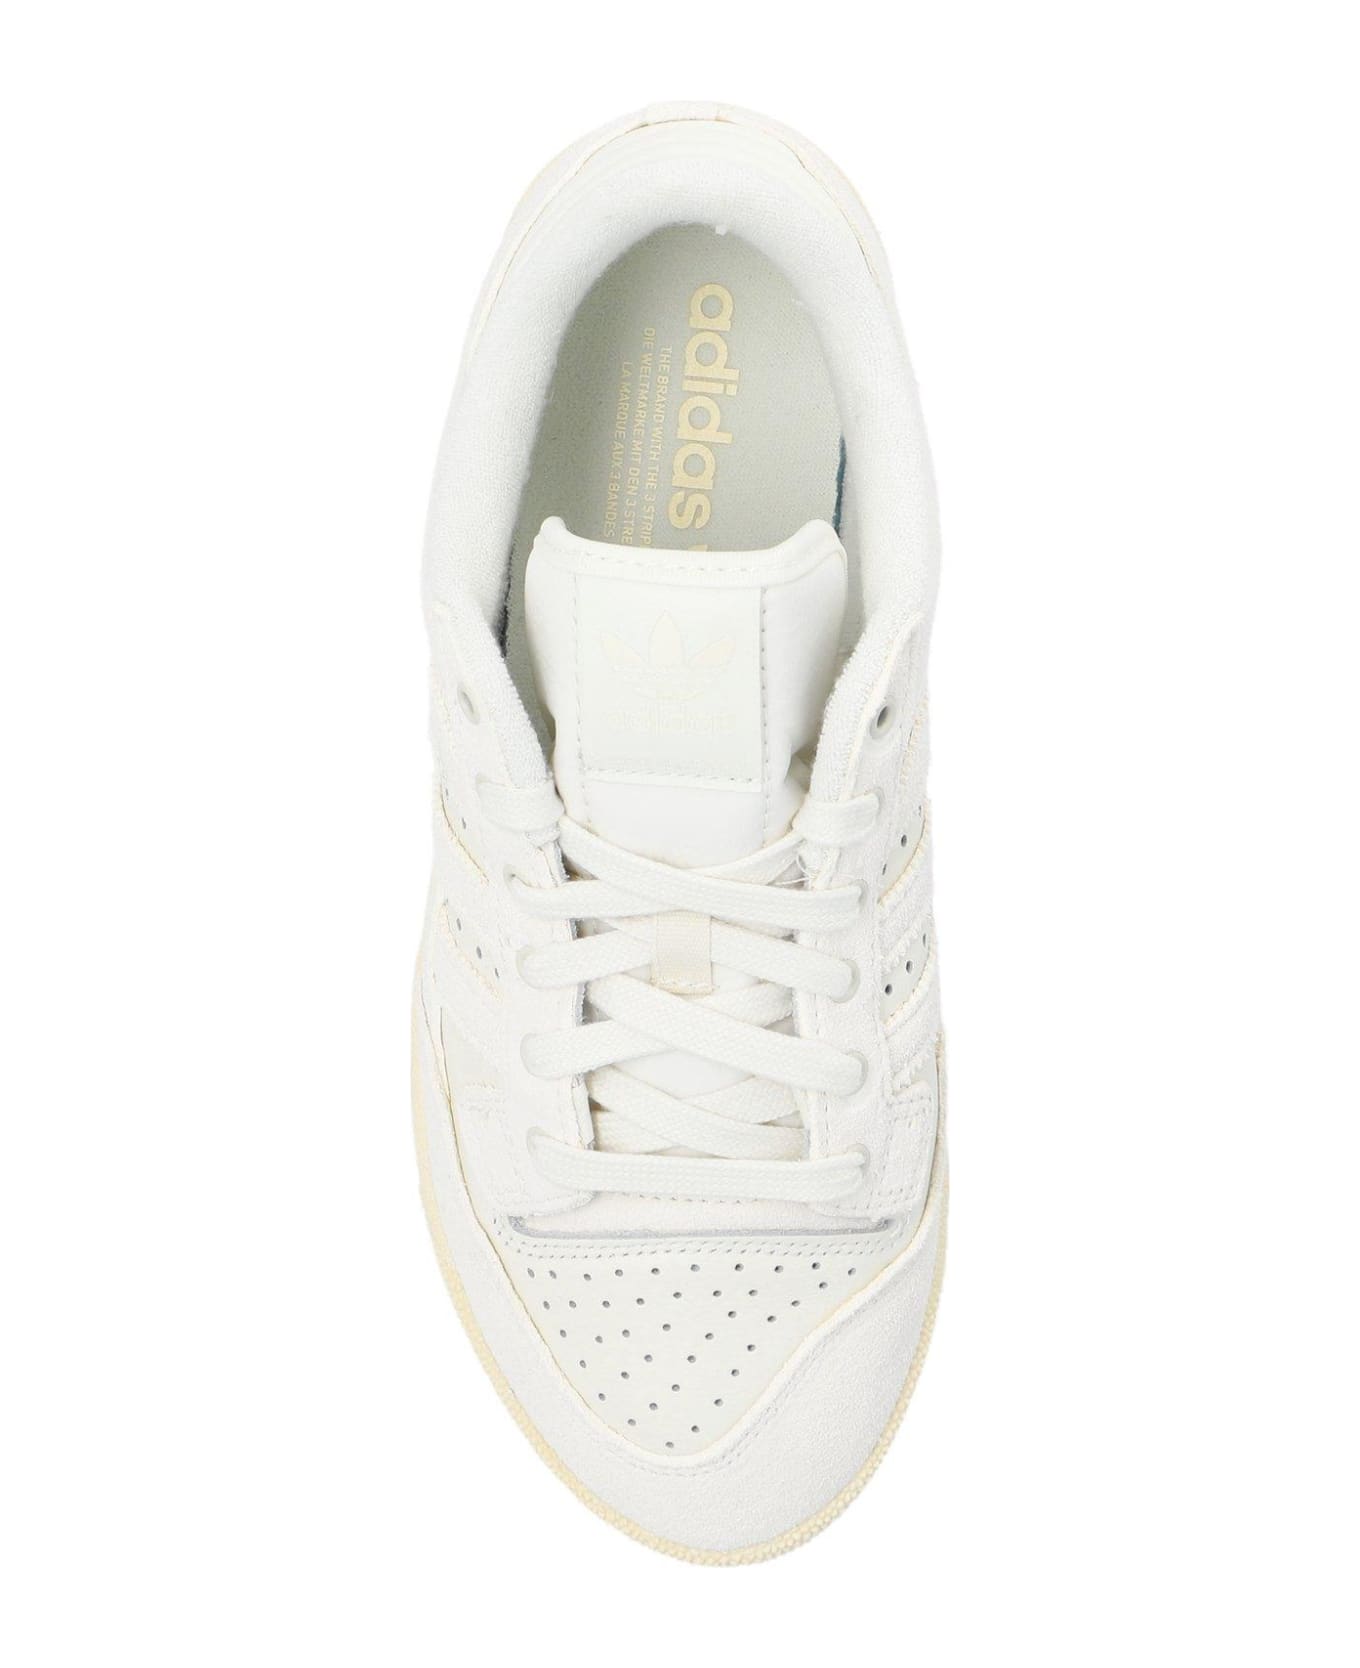 Adidas Originals Centennial 85 Lace-up Sneakers - White スニーカー